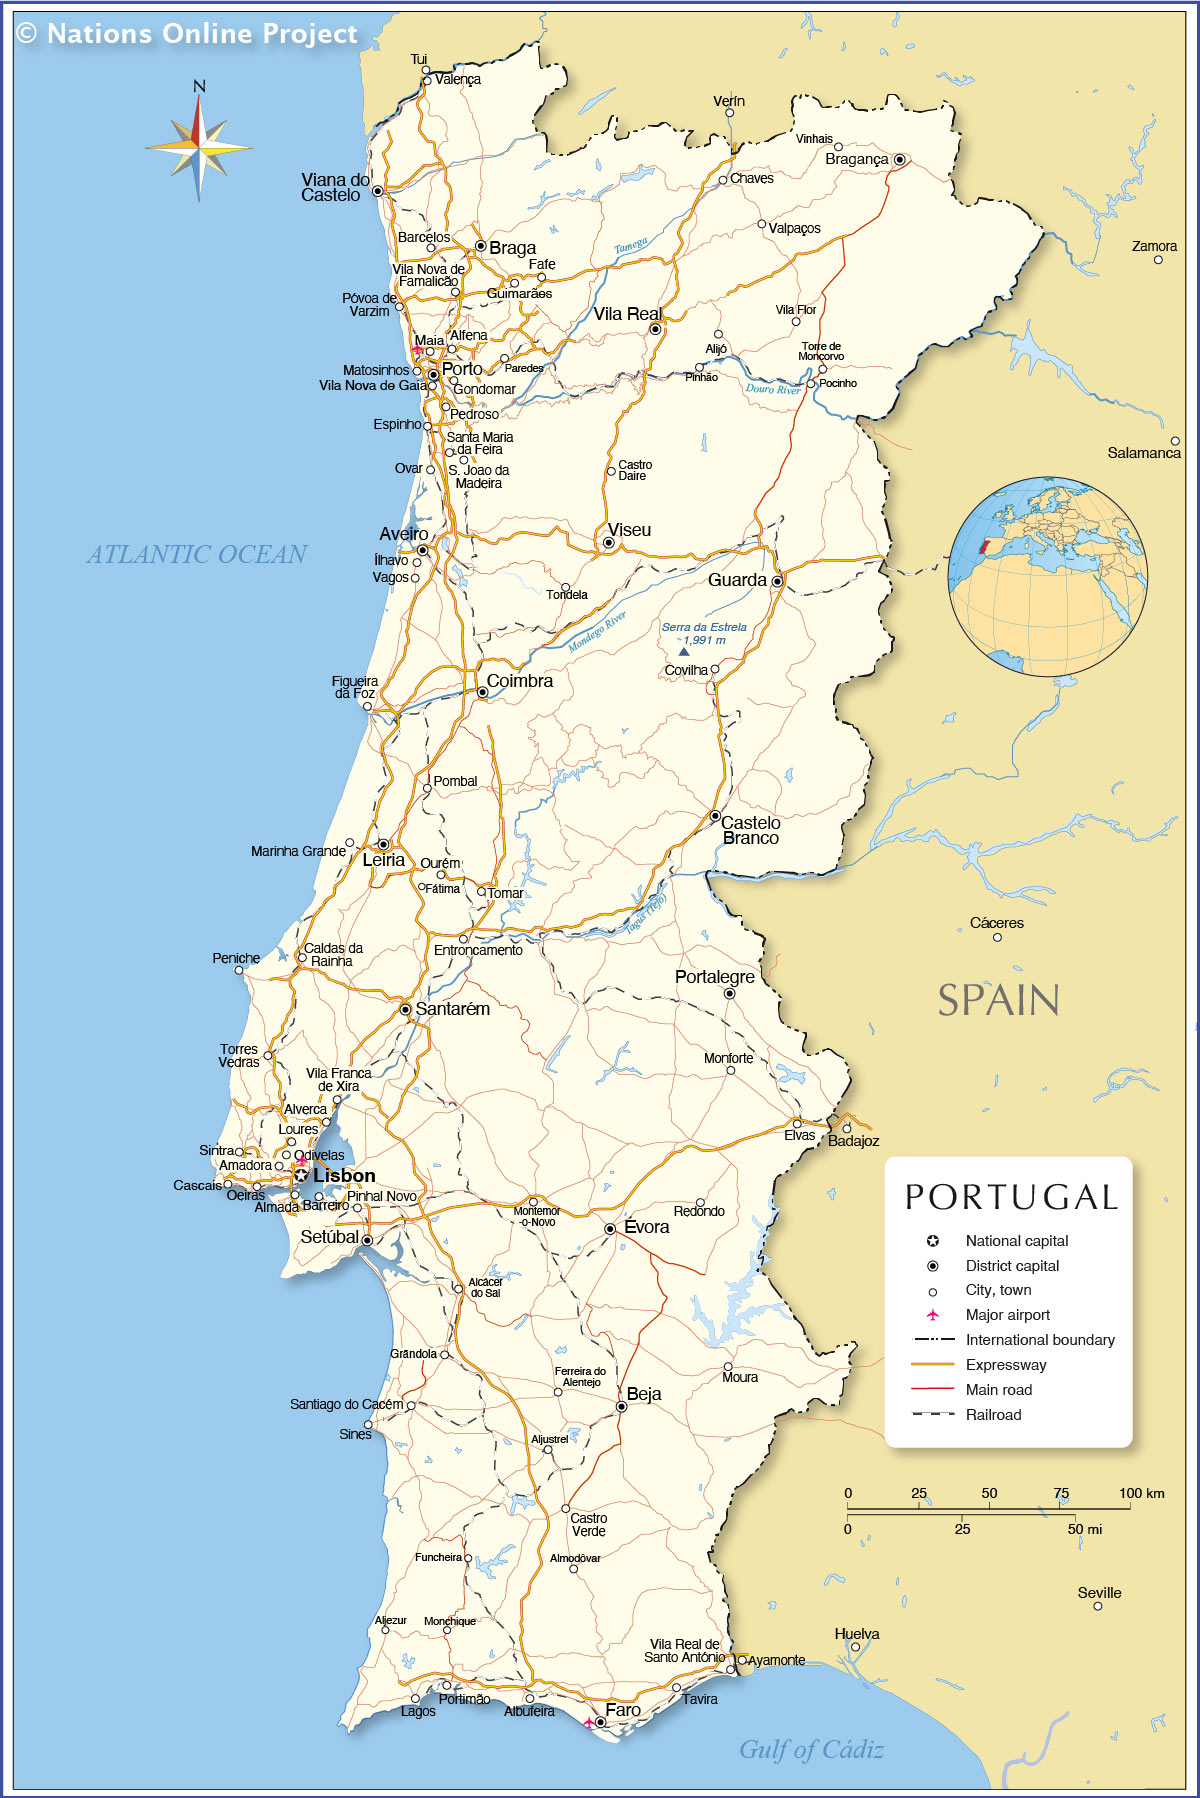 Political Map of Portugal - Nations Online Project